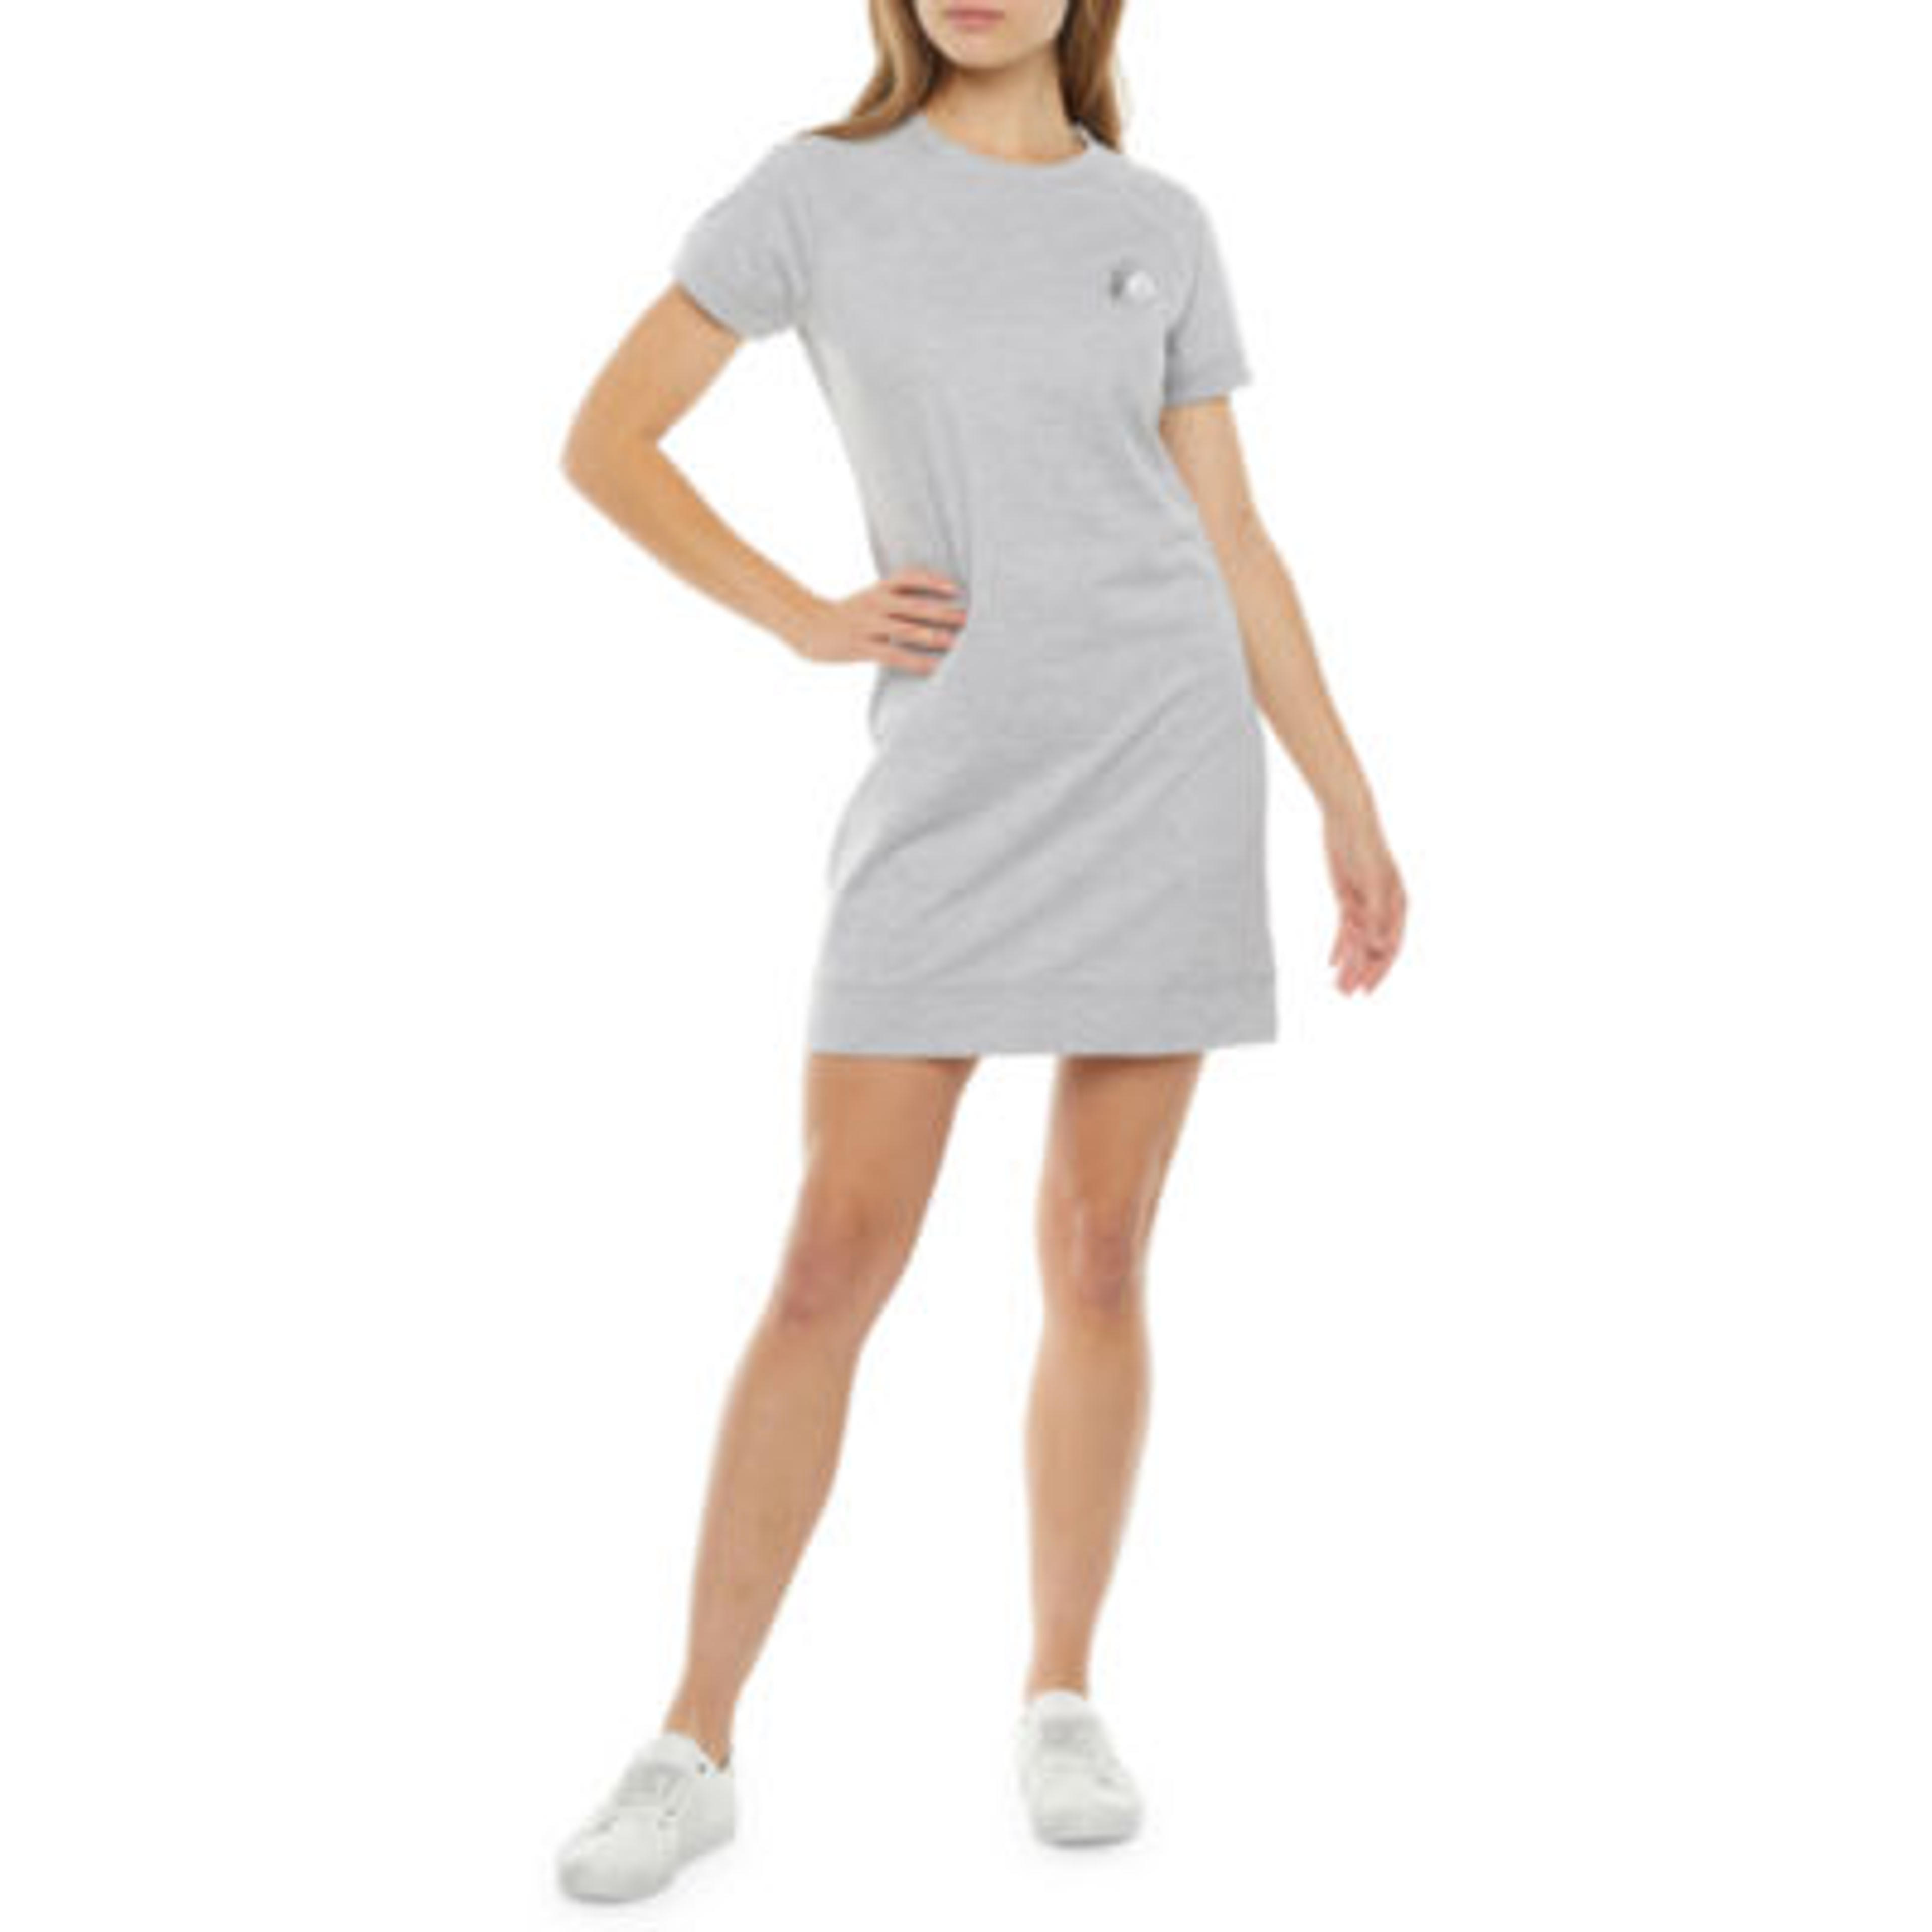 Juicy By Juicy Couture Short Sleeve Checked T-Shirt Dress - JCPenney